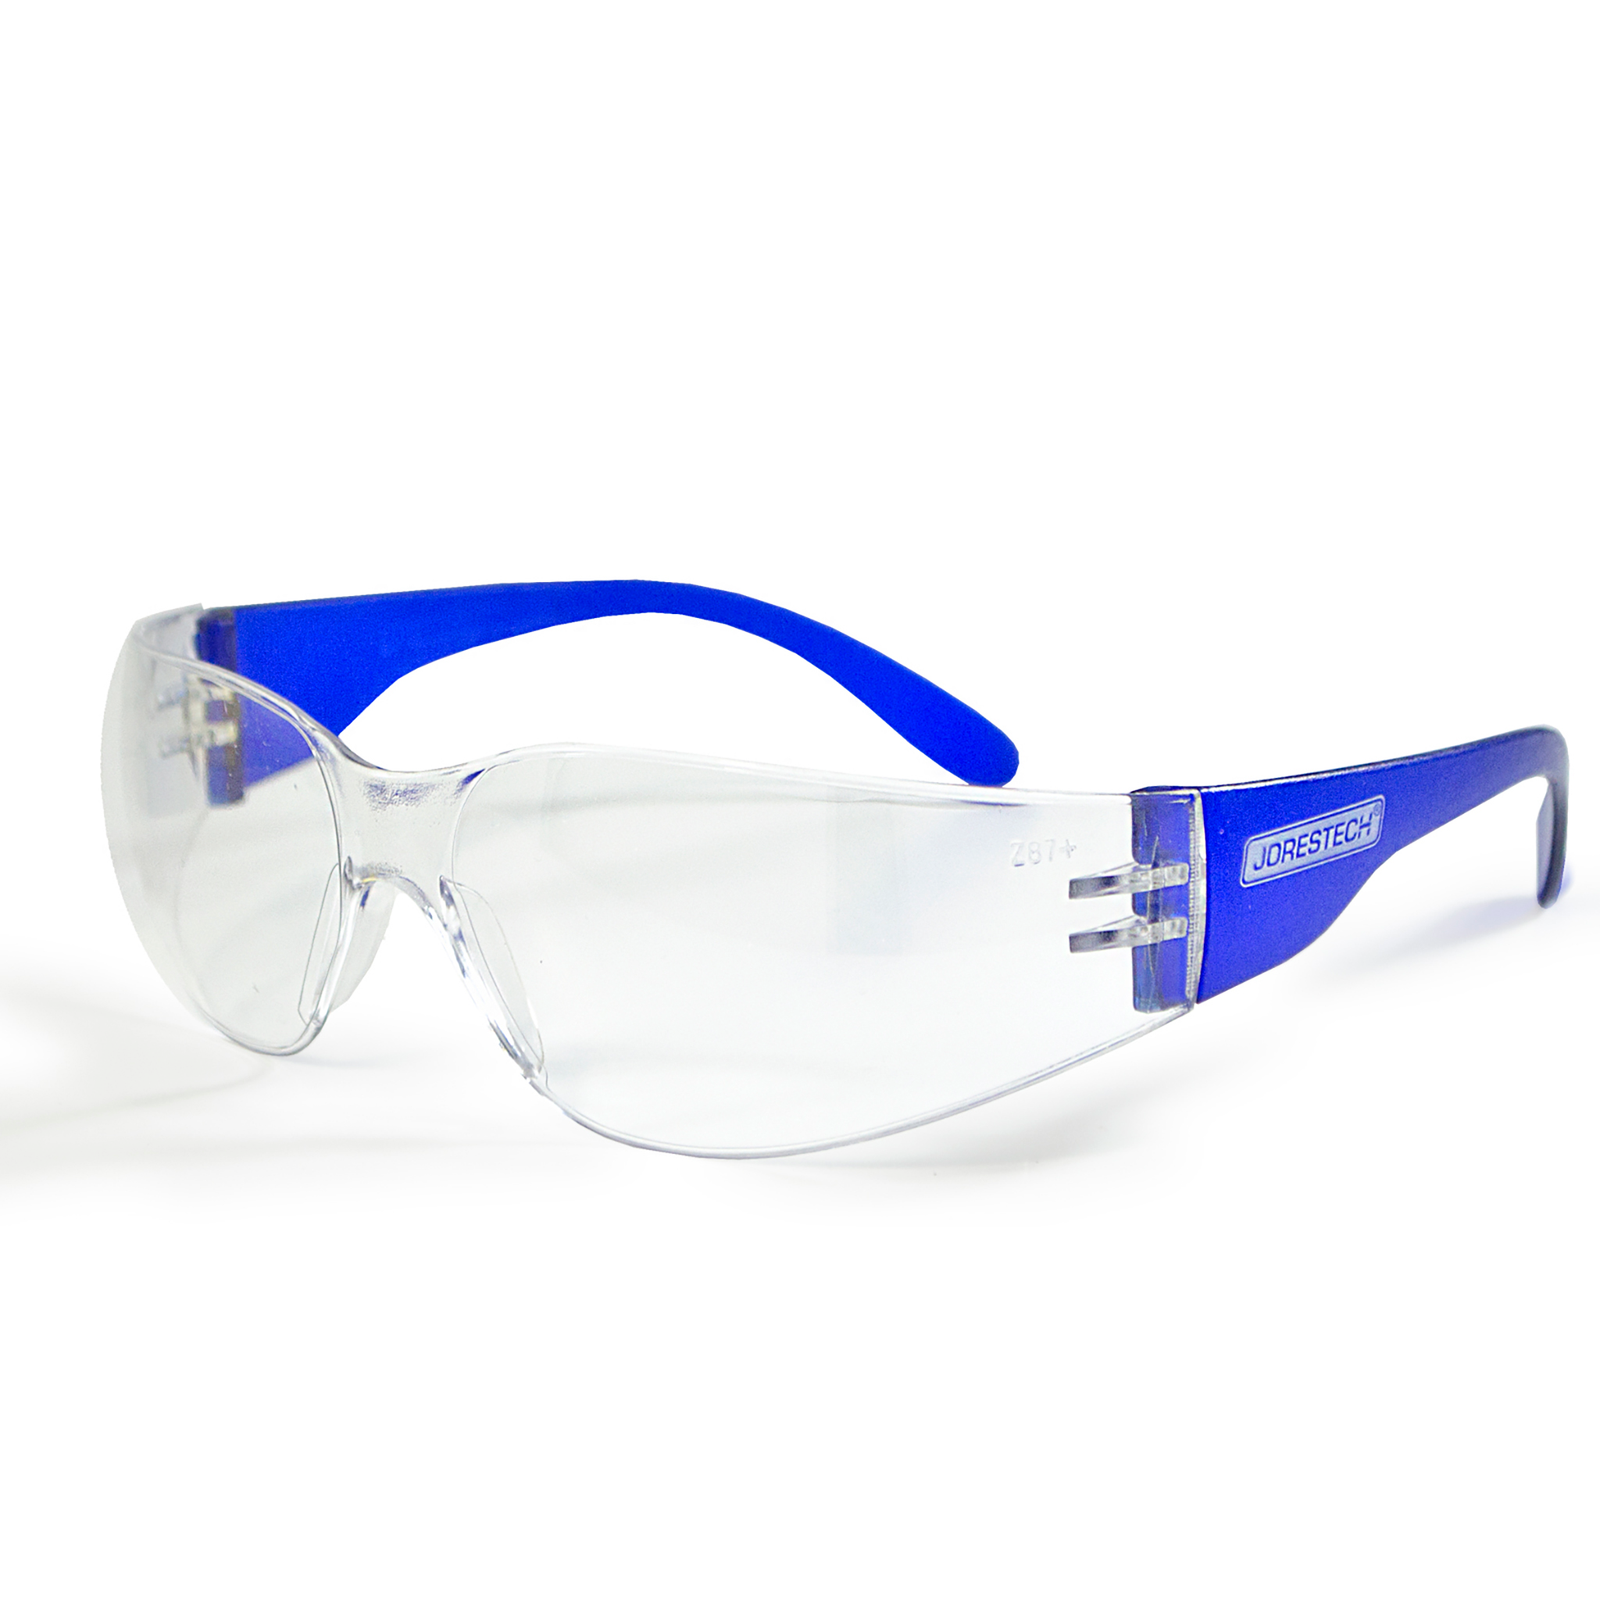 Features one JORESTECH high impact glass with clear polycarbonate lenses and blue temples over white background.